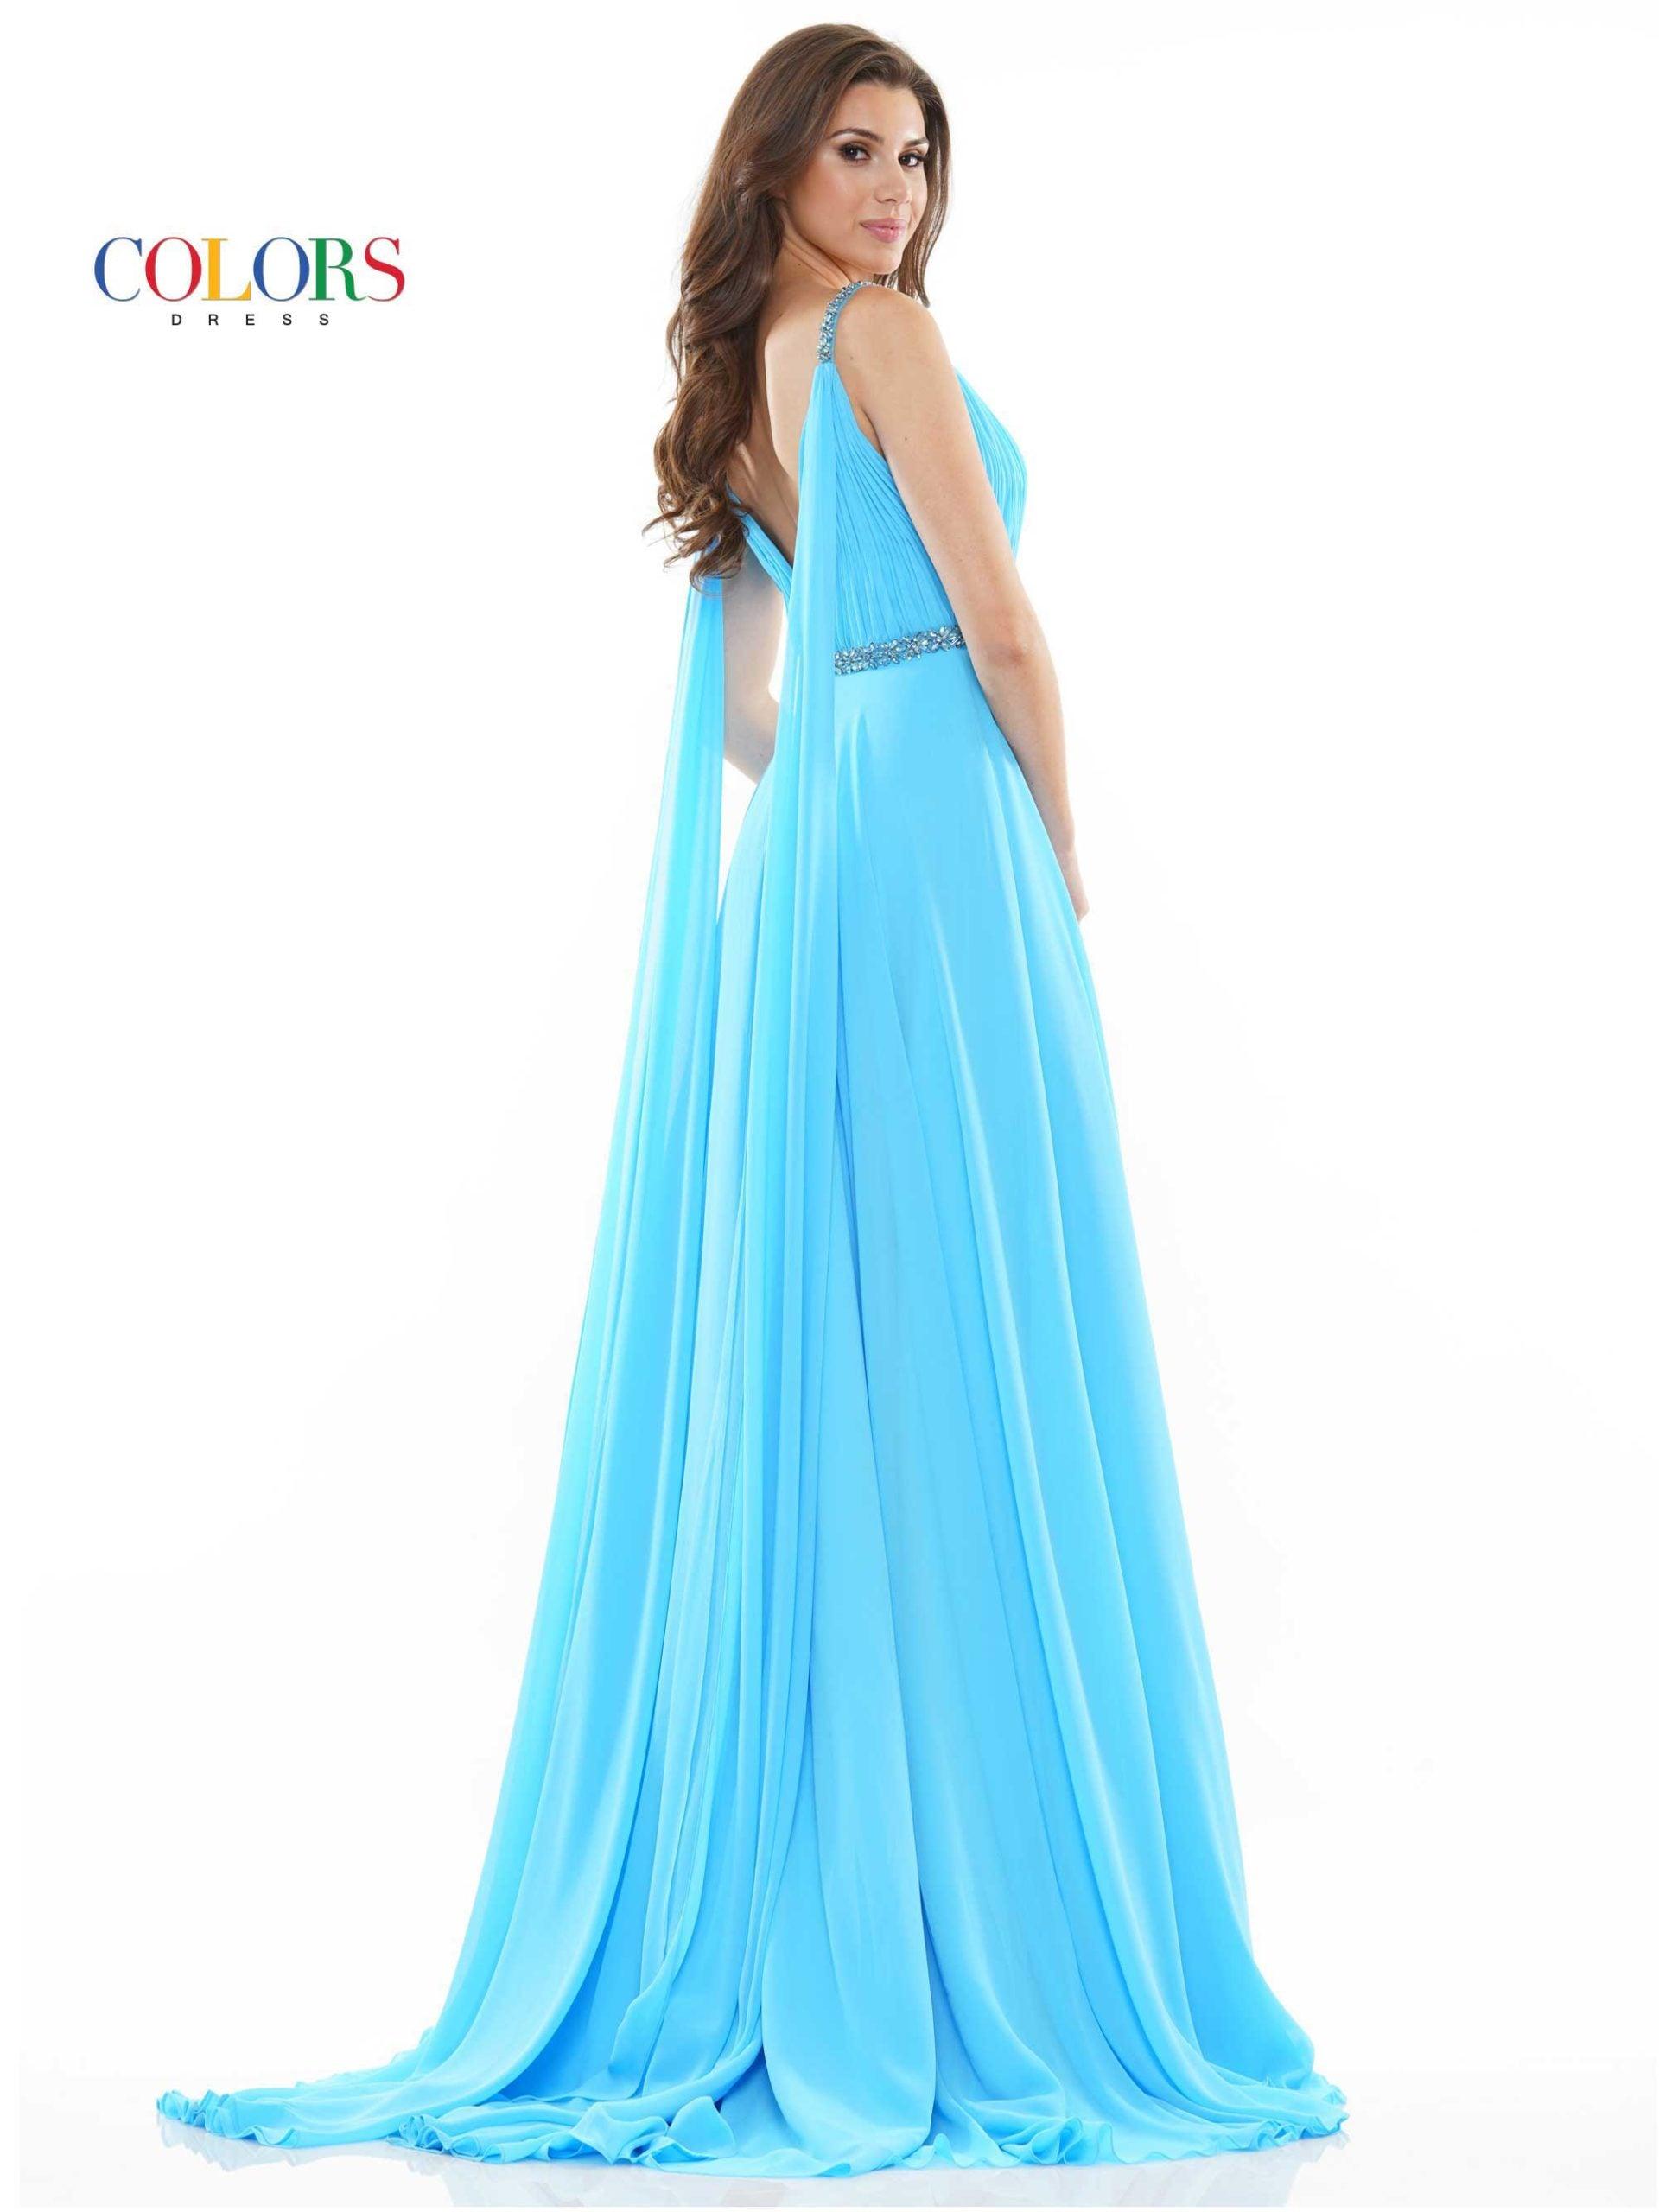 Colors Long Formal Chiffon Prom Dress 2502 - The Dress Outlet